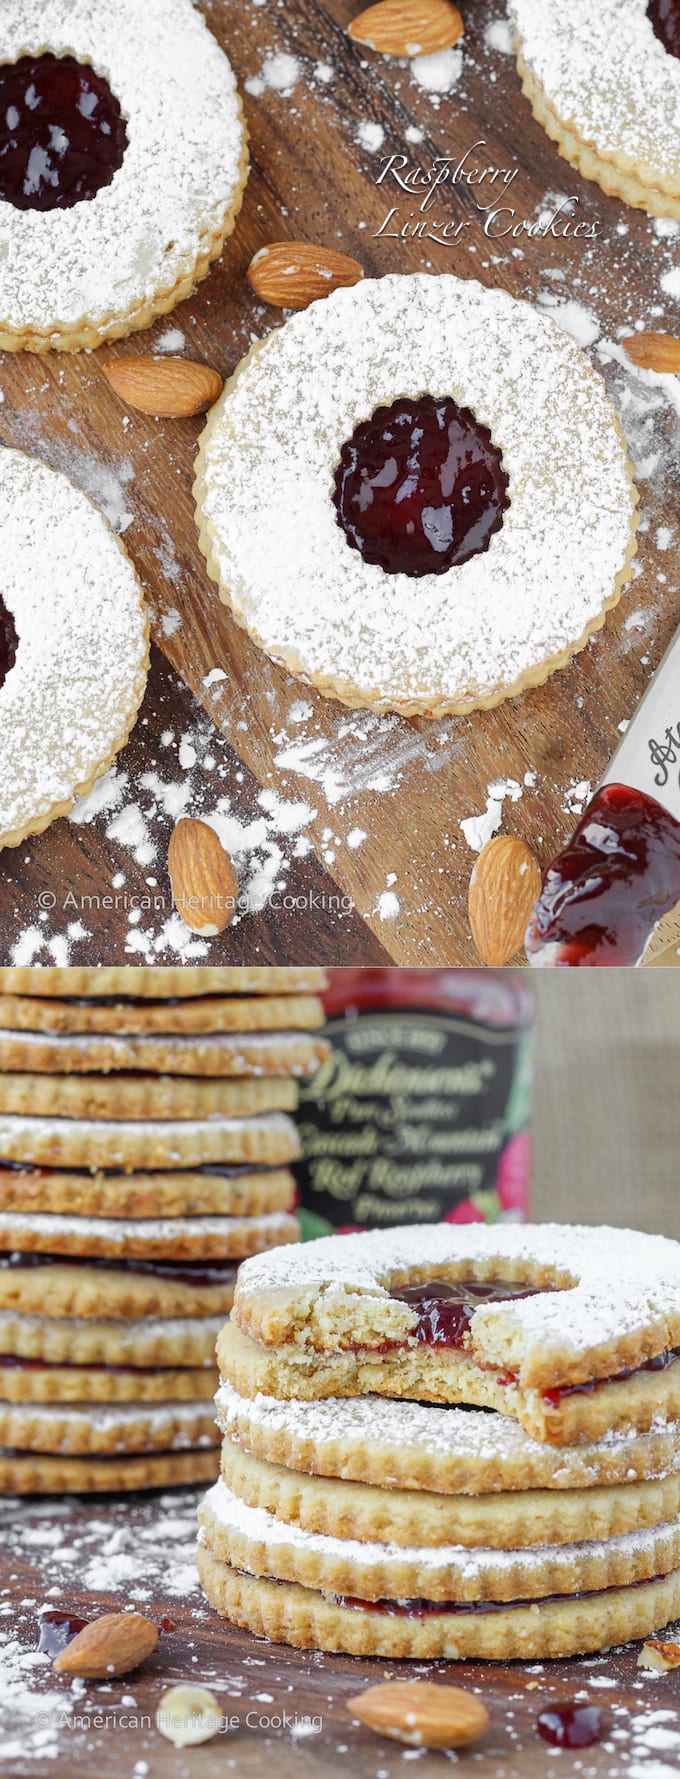 Circularly cut linzer cookies with red raspberry centers.